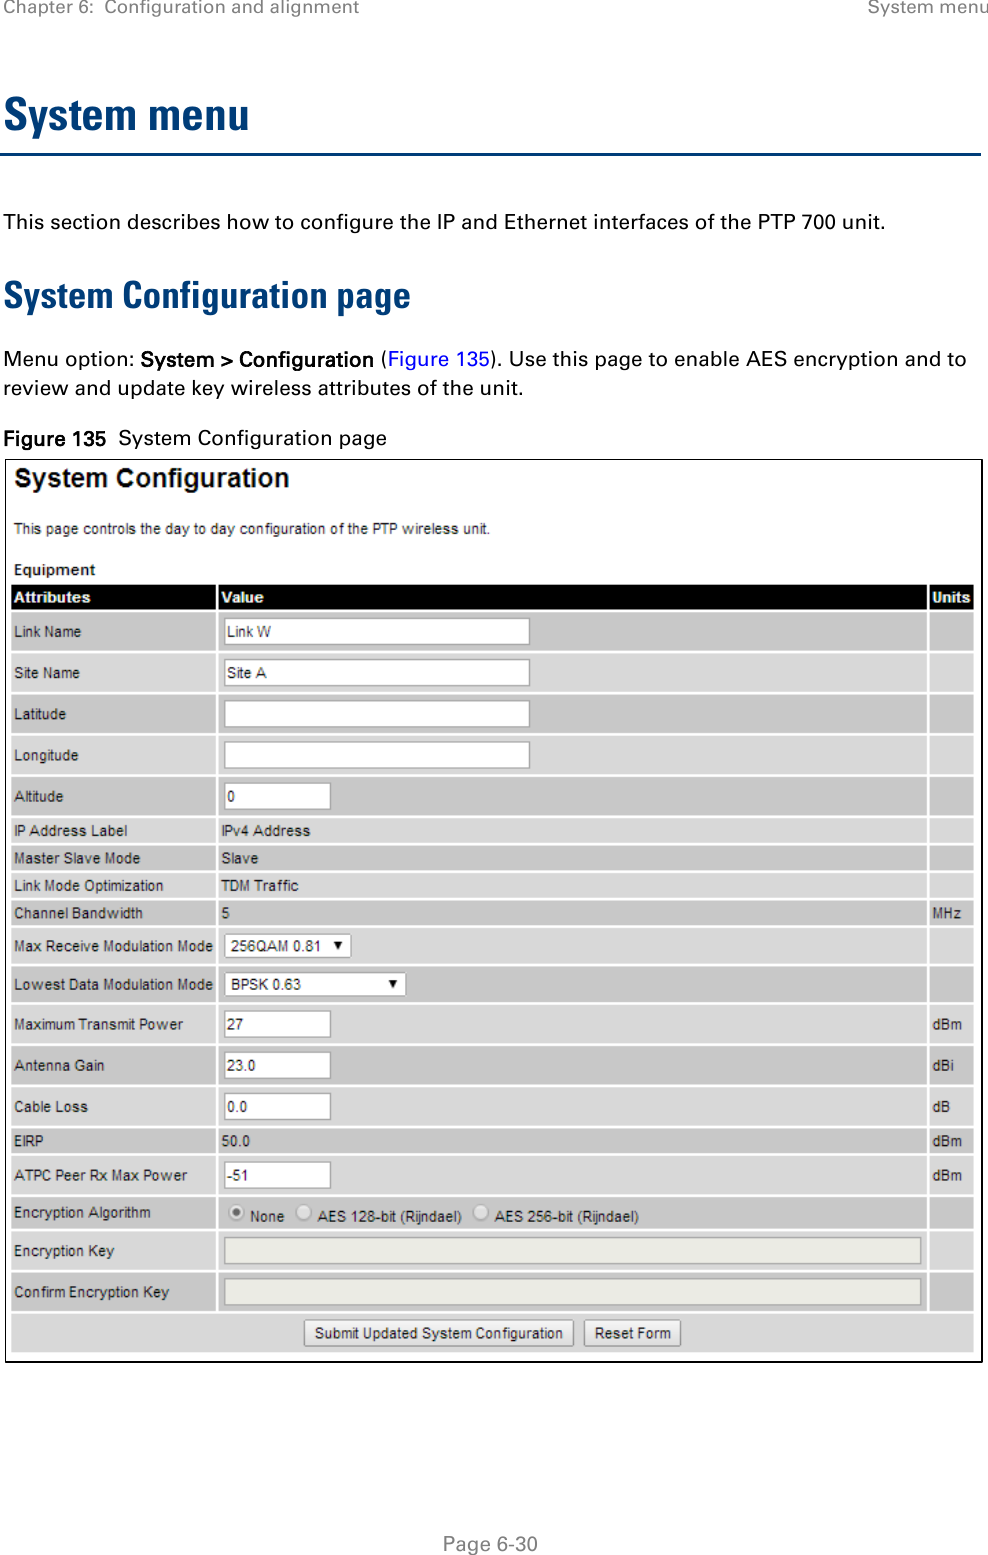 Chapter 6:  Configuration and alignment System menu  System menu This section describes how to configure the IP and Ethernet interfaces of the PTP 700 unit. System Configuration page Menu option: System &gt; Configuration (Figure 135). Use this page to enable AES encryption and to review and update key wireless attributes of the unit. Figure 135  System Configuration page    Page 6-30 